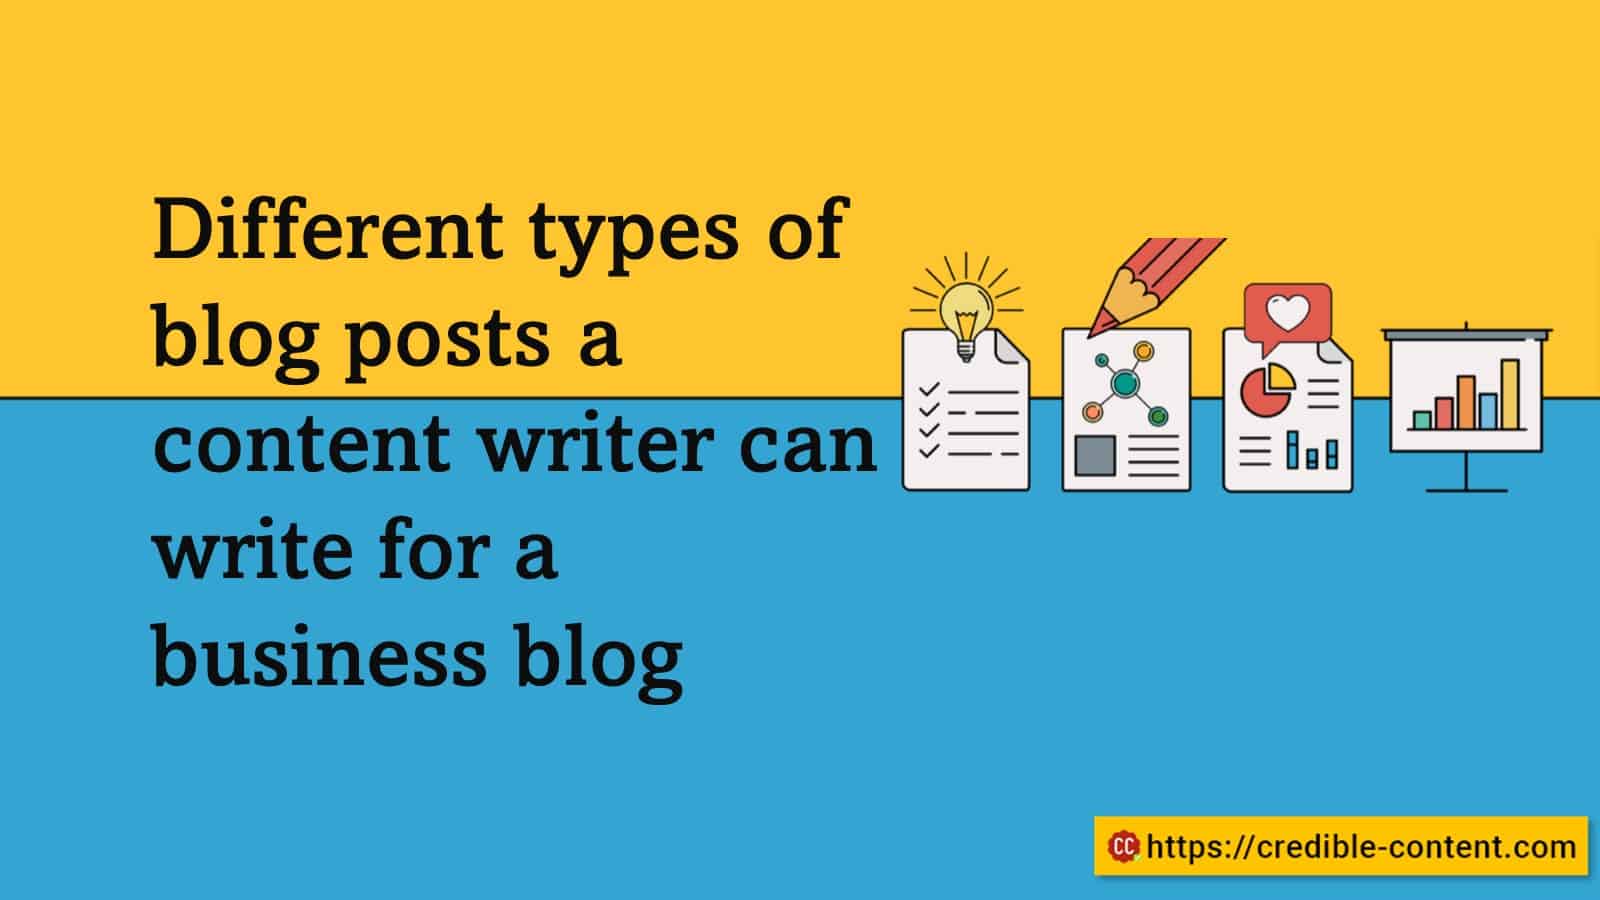 Different types of blog posts a content writer can write for a business blog